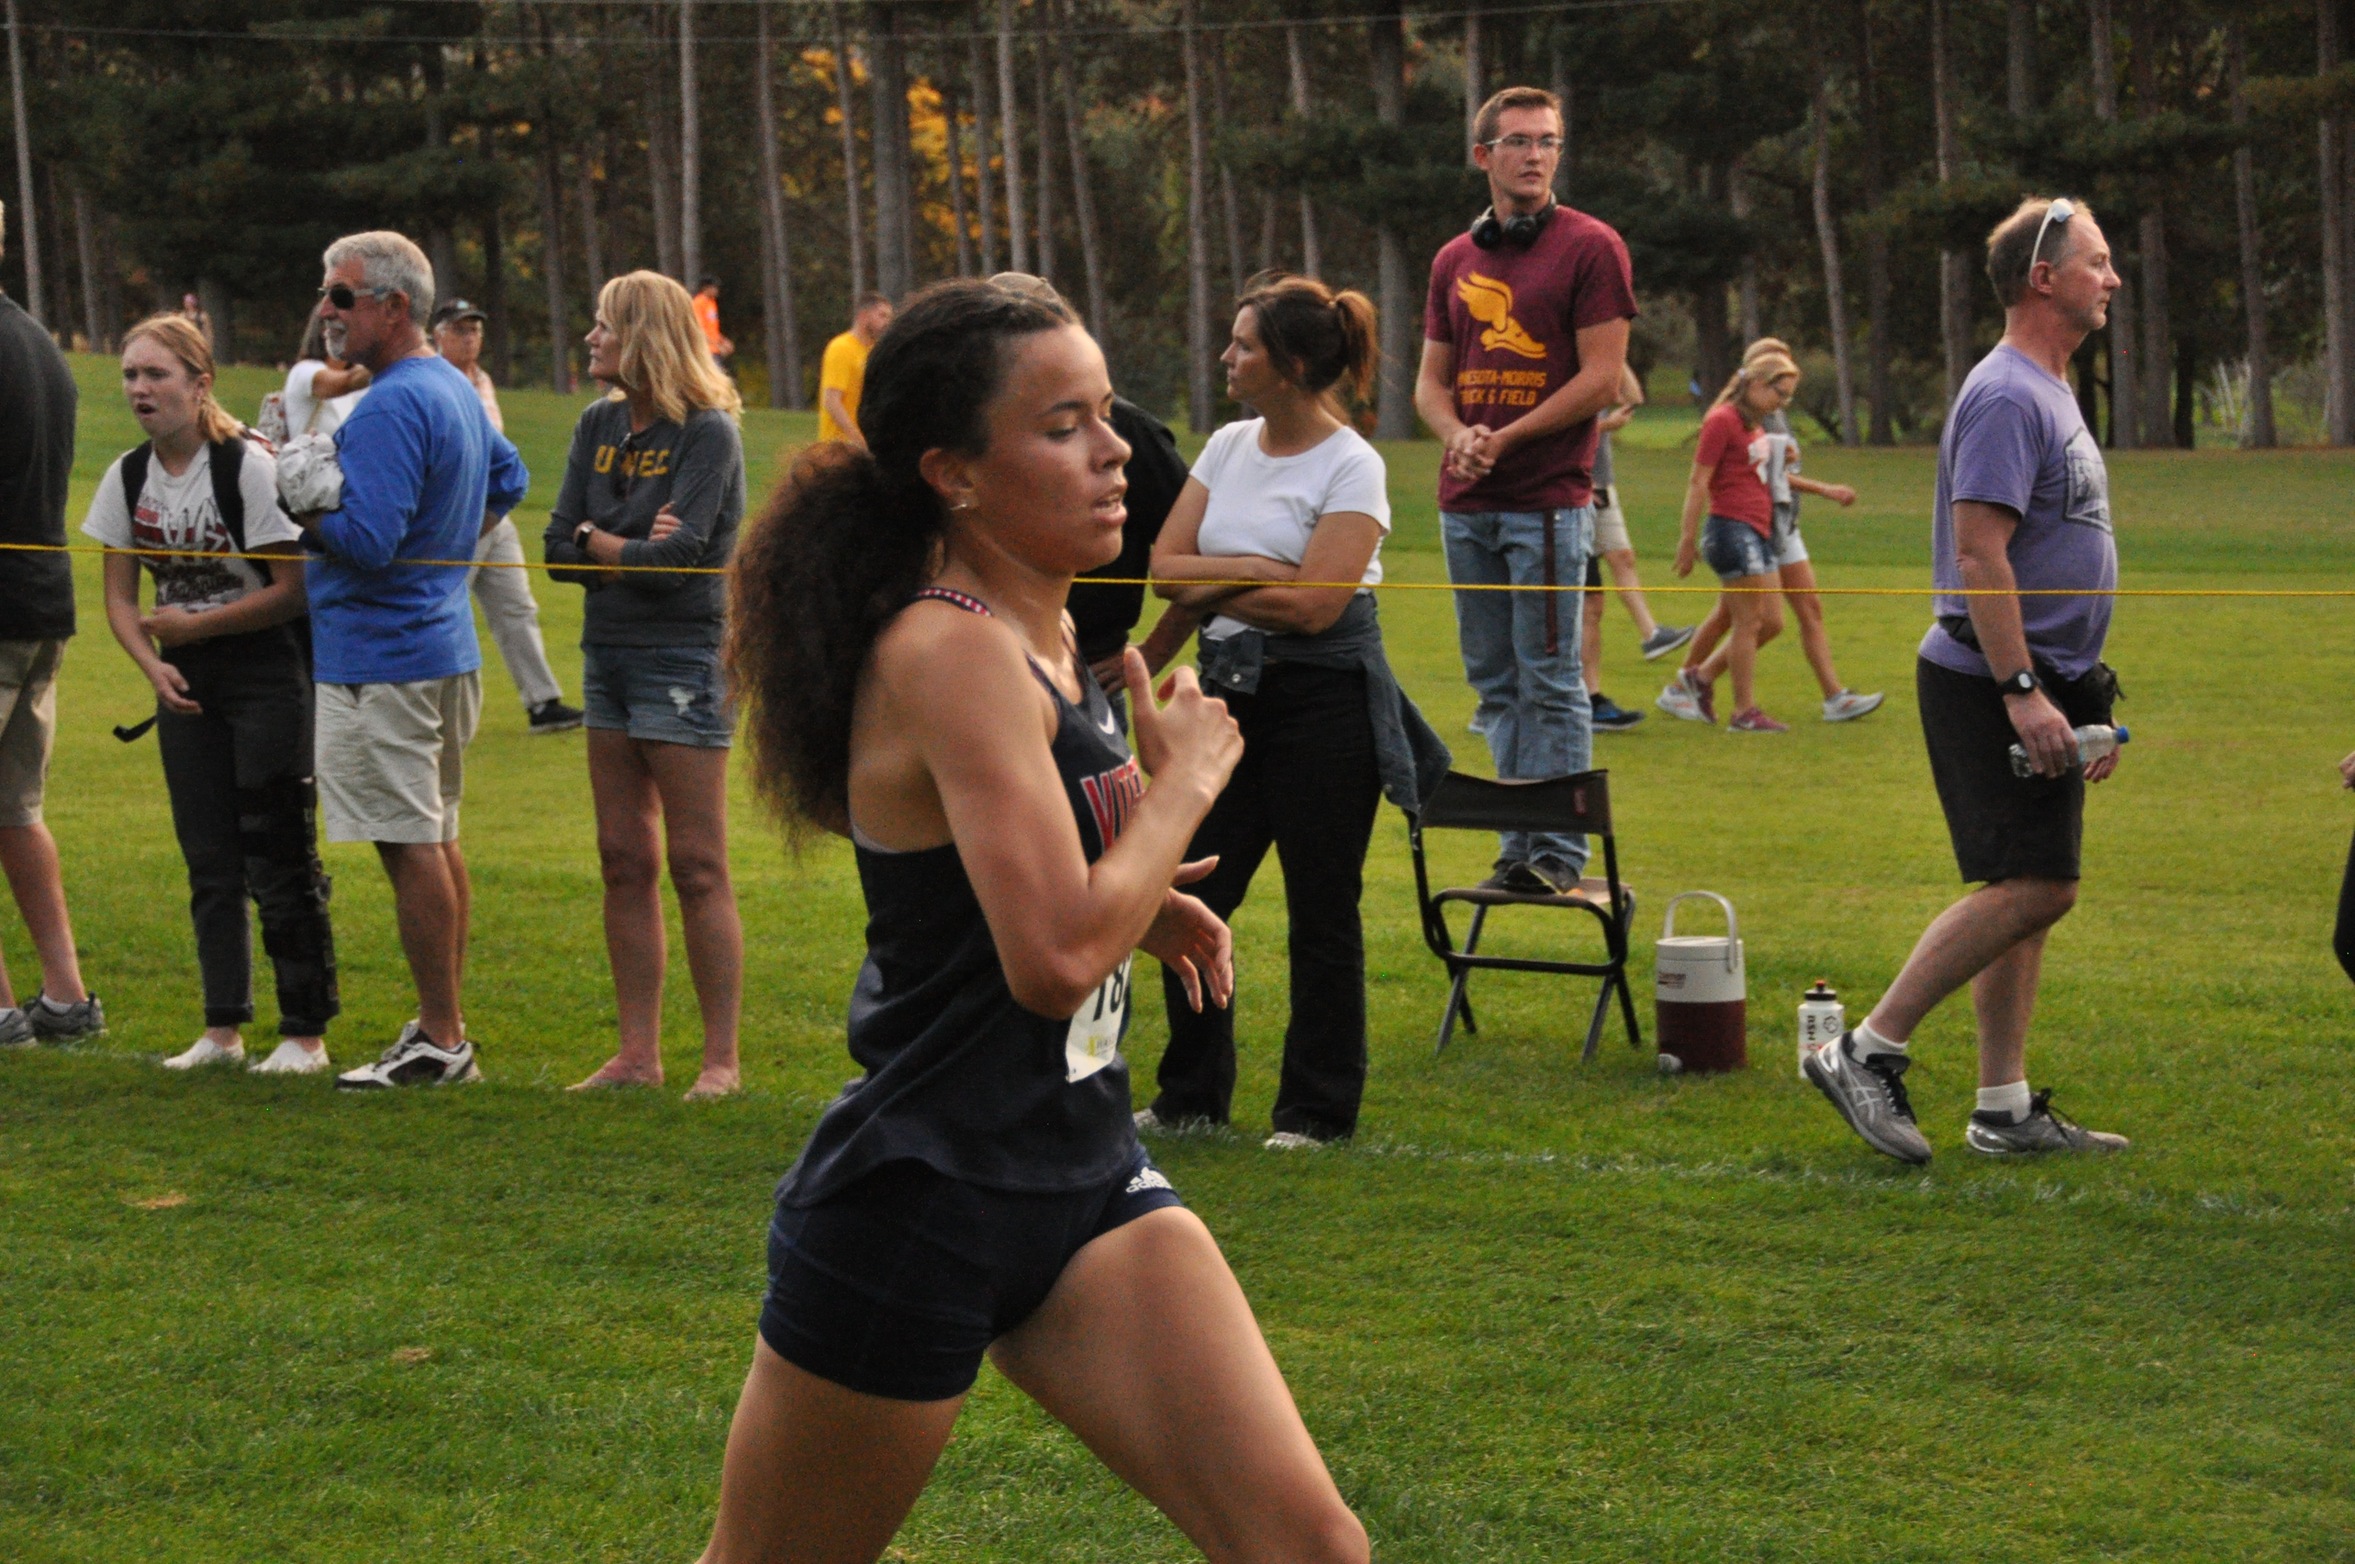 Viterbo women place 20th of 27 teams at Blugold Invitational